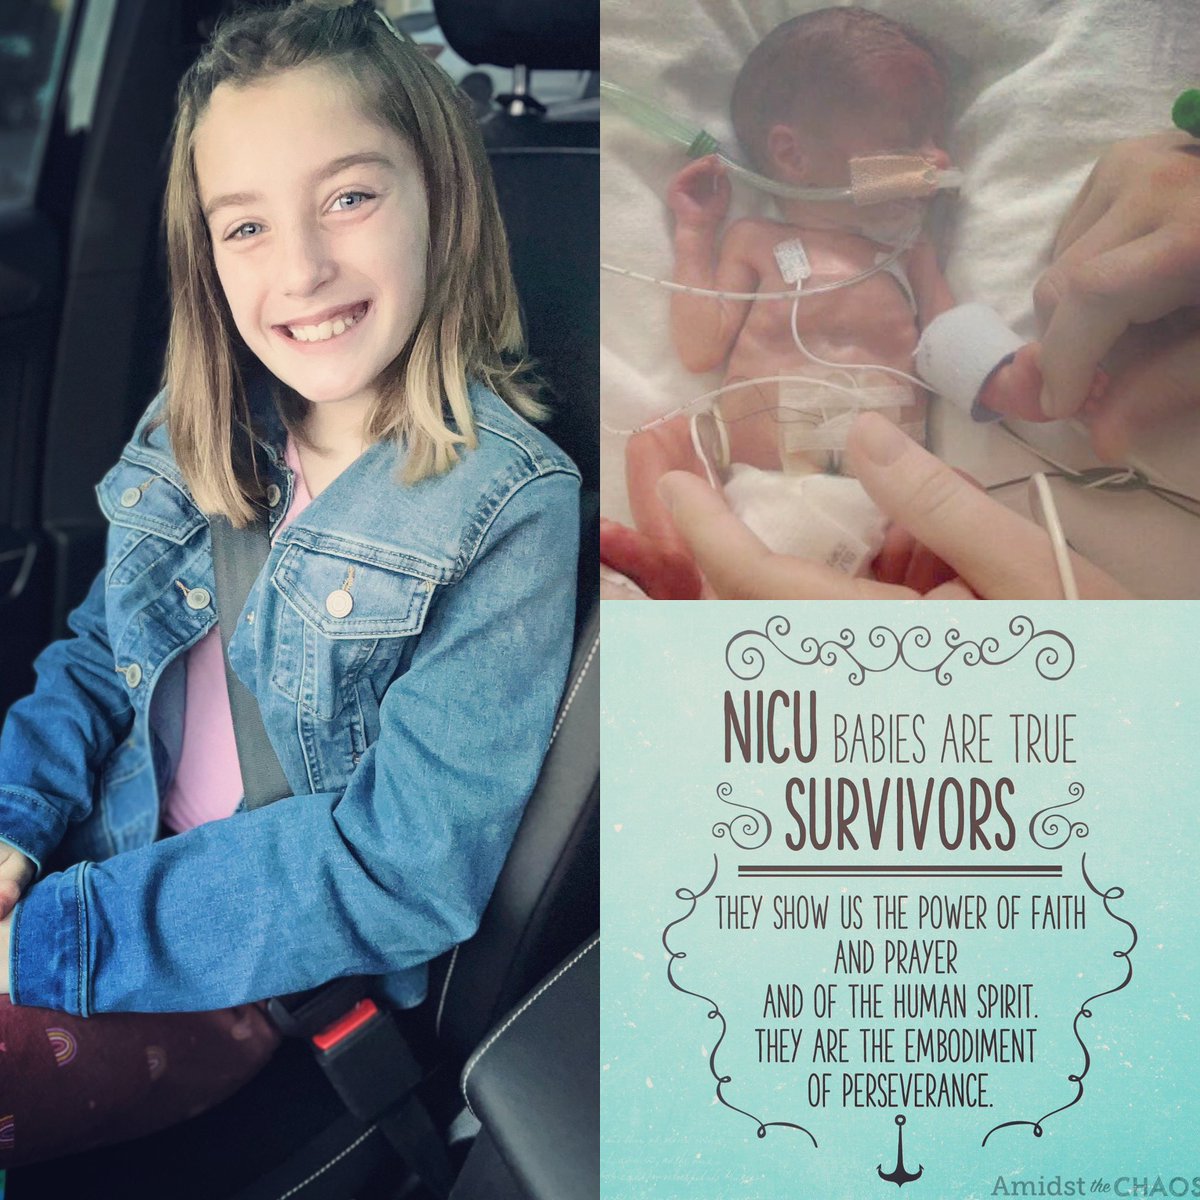 Born at 24 wks gestation, spent 183 days in Winnie Palmer NICU surrounded by glass, wires, oxygen & medical teams. With faith & prayer, Dakota battled to live showing the world her purpose & warrior spirit. Today my sweet miracle is 10!  #nicustrong #micropreemie #hellpssurvivors